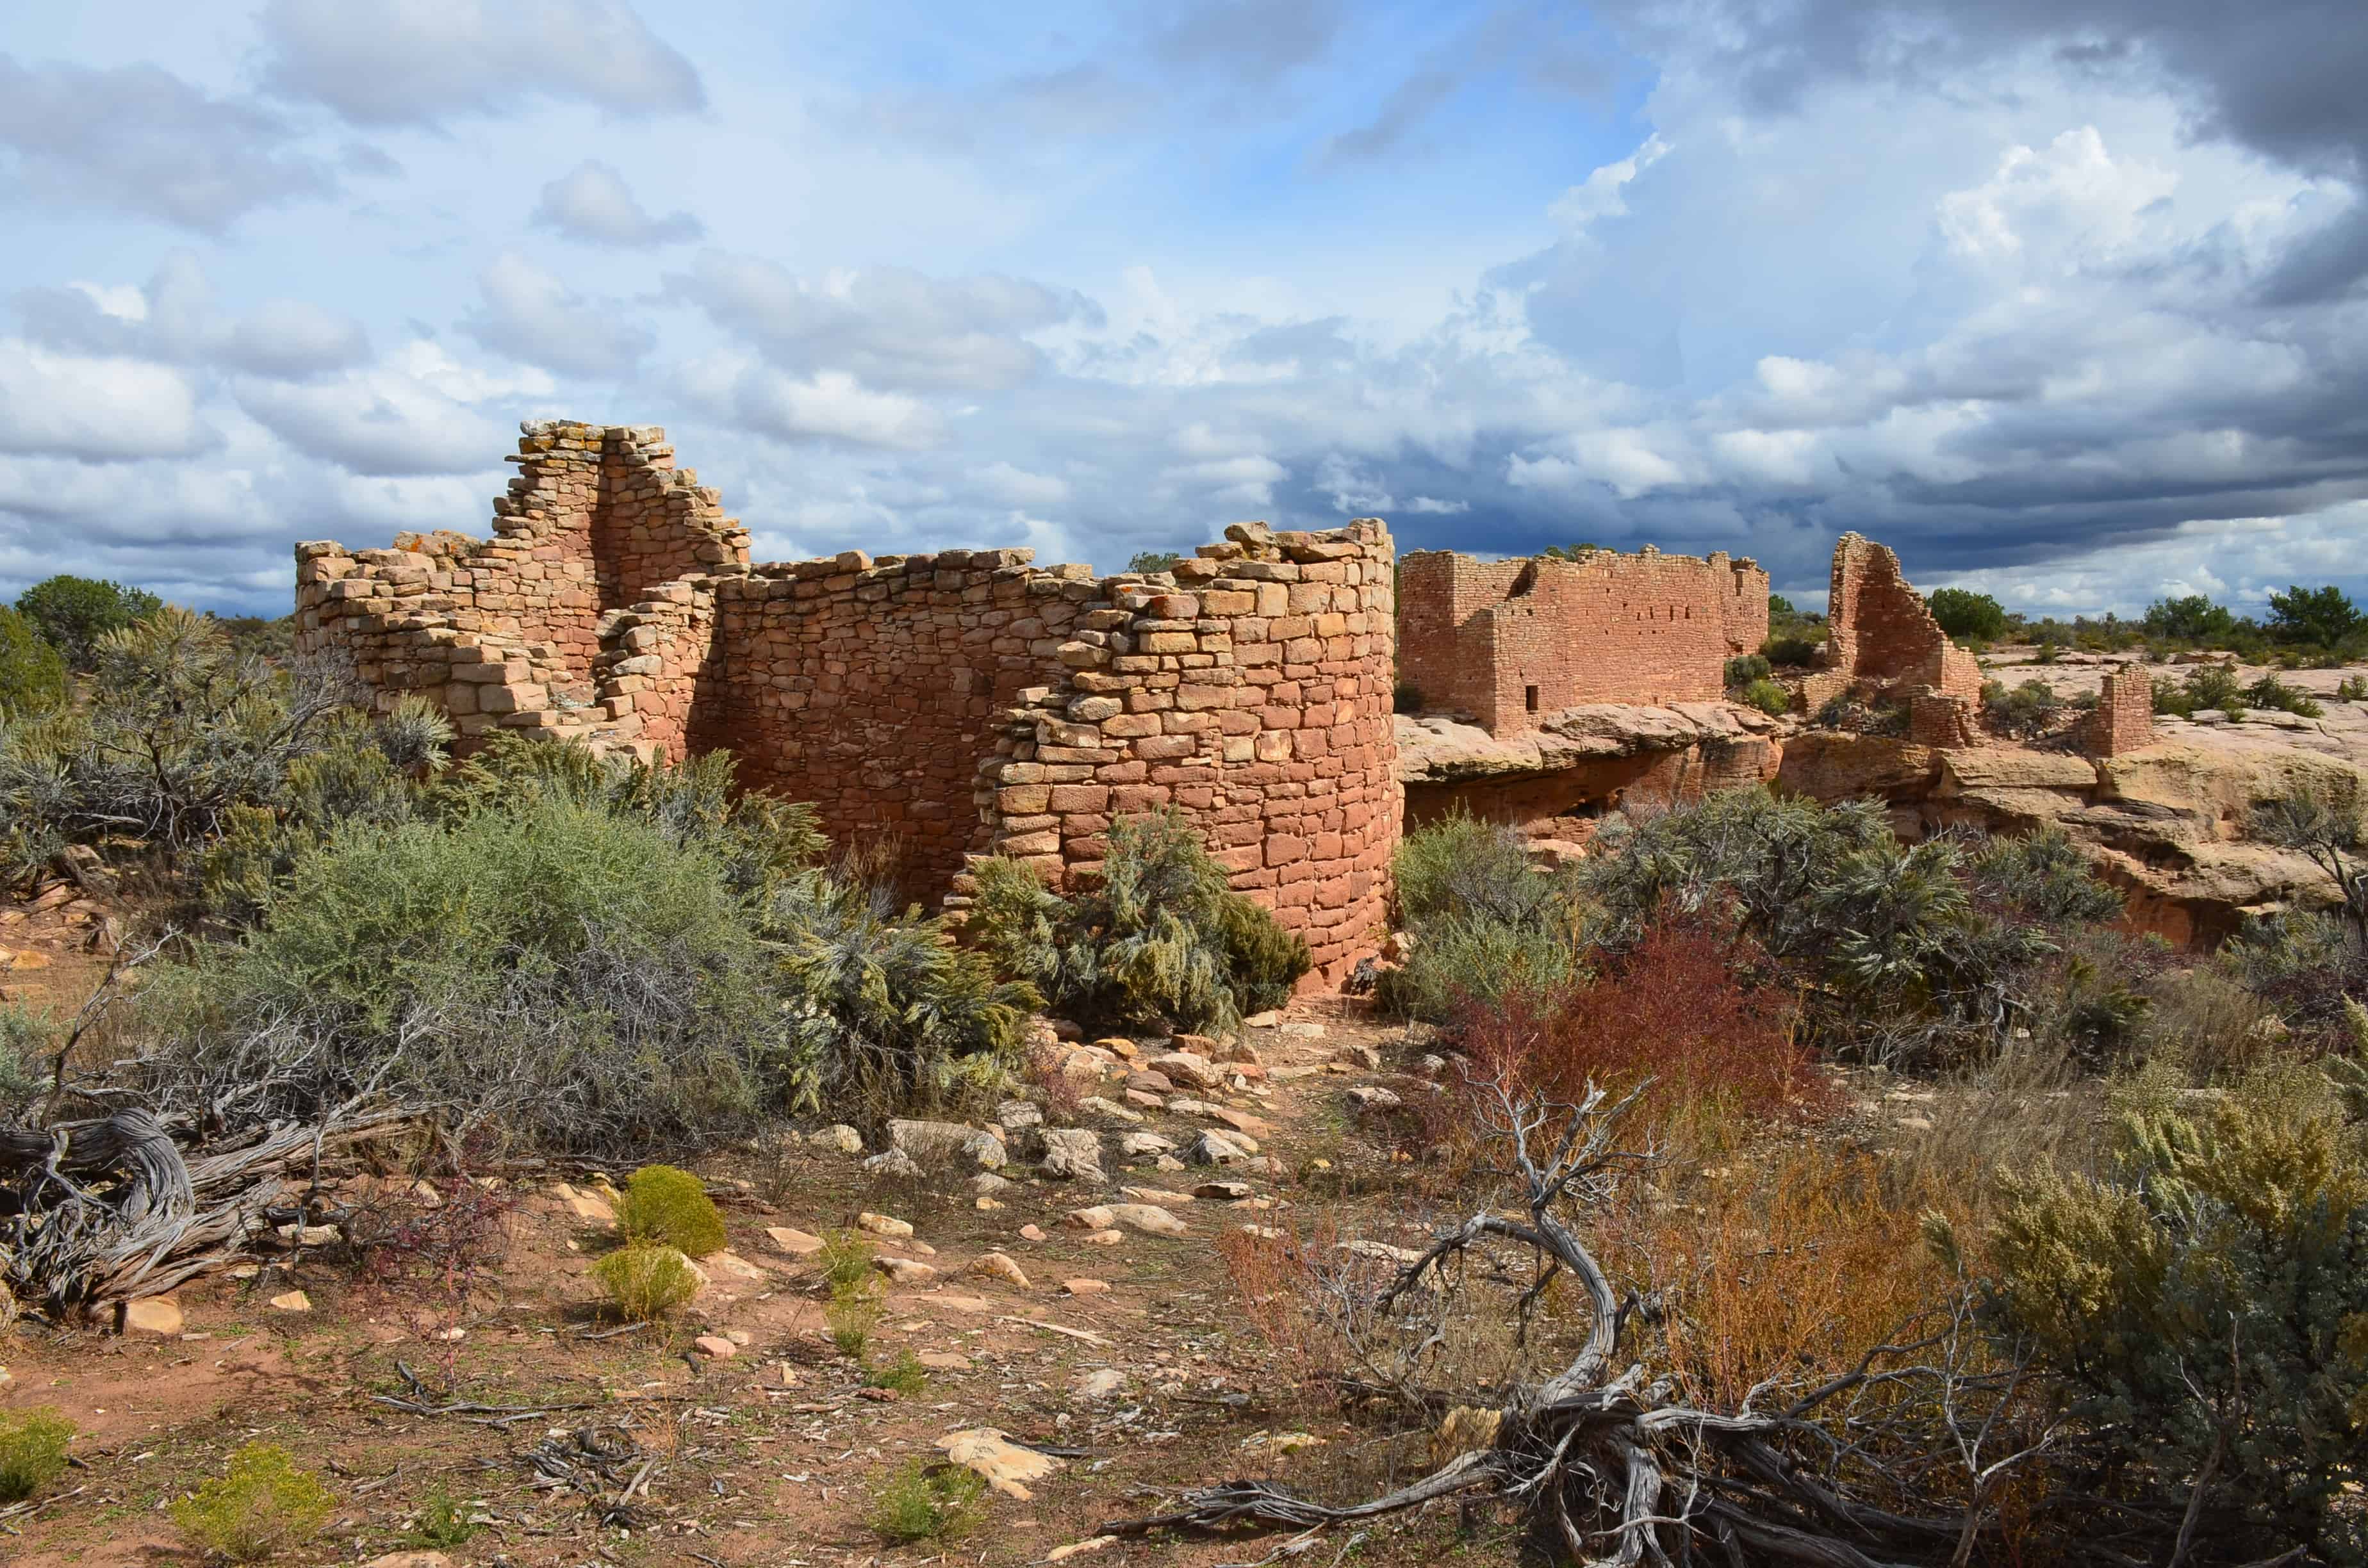 Hovenweep House (left) and Hovenweep Castle (right) at Hovenweep National Monument in Utah